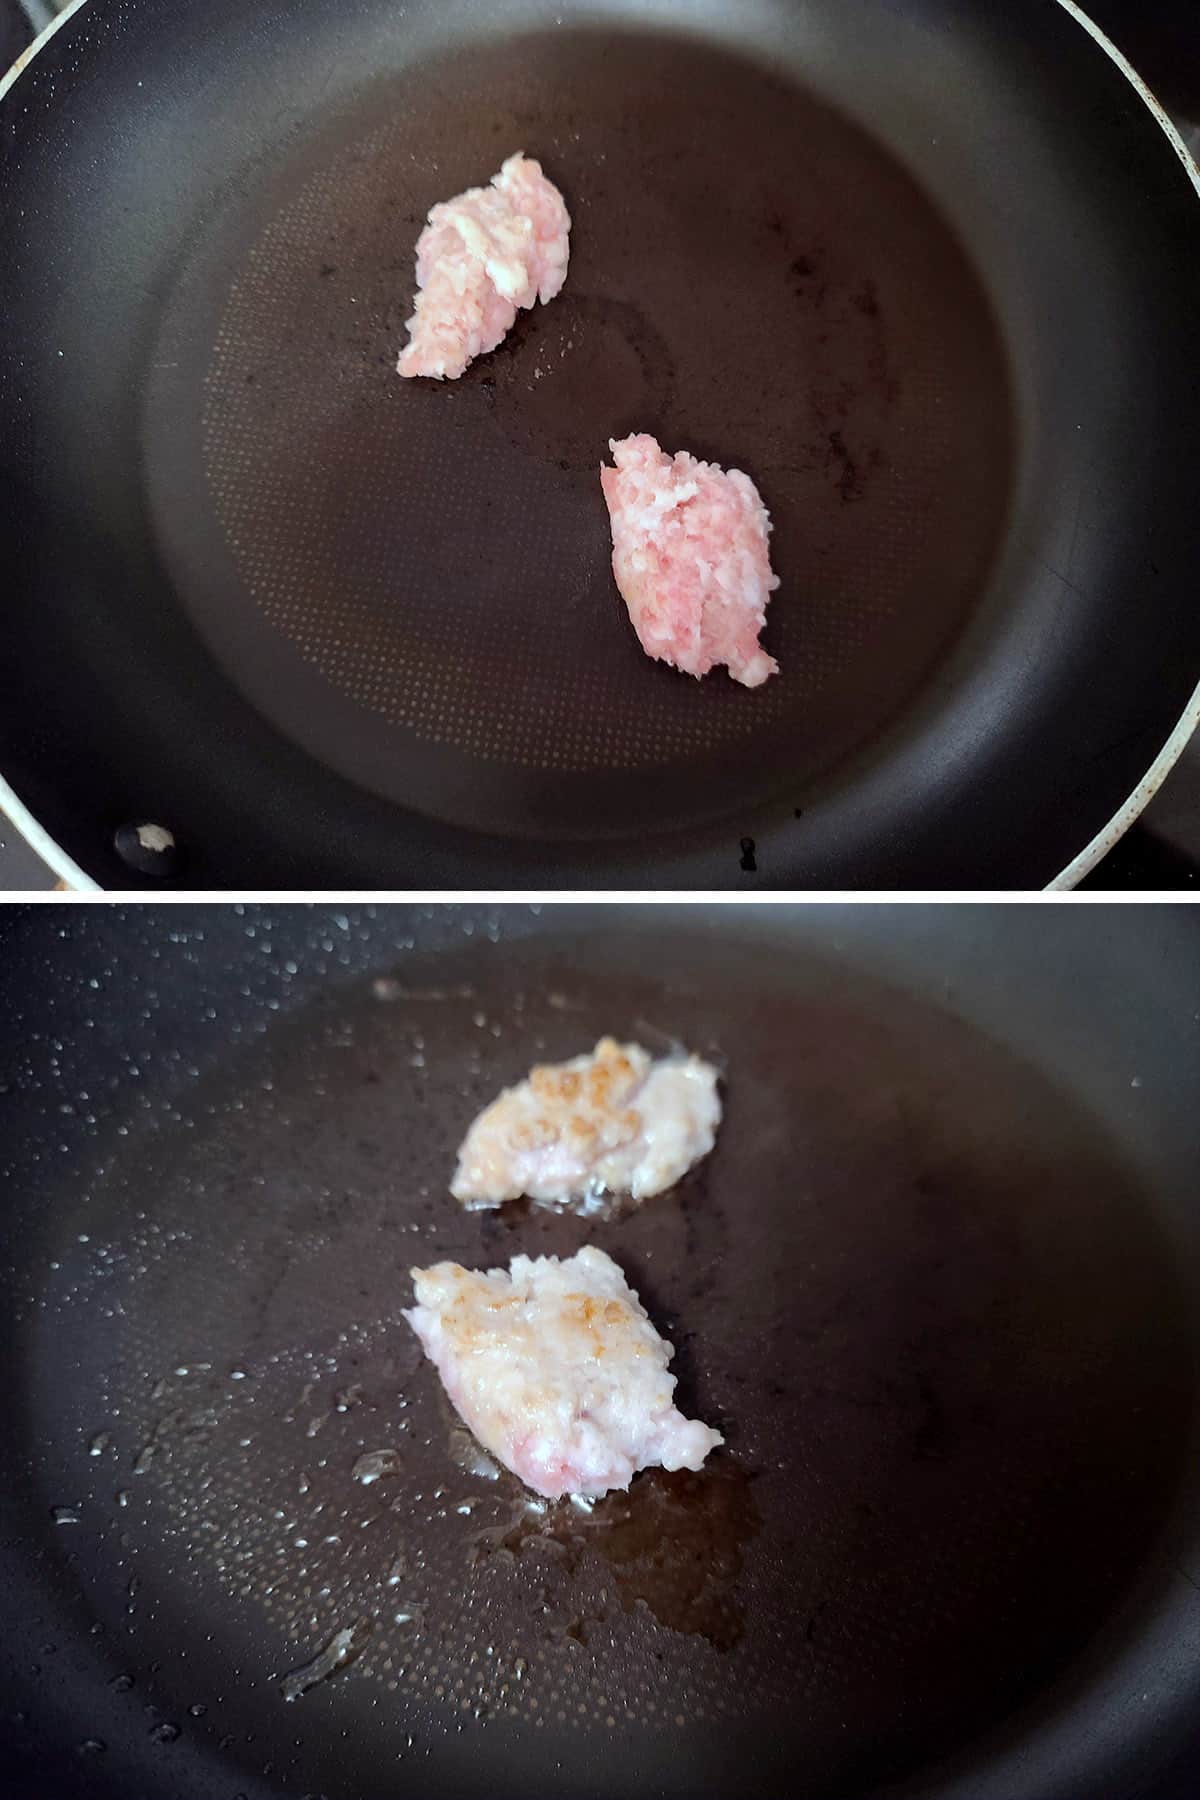 A 2 part image showing two small pieces of pork sausage being cooked in a frying pan.